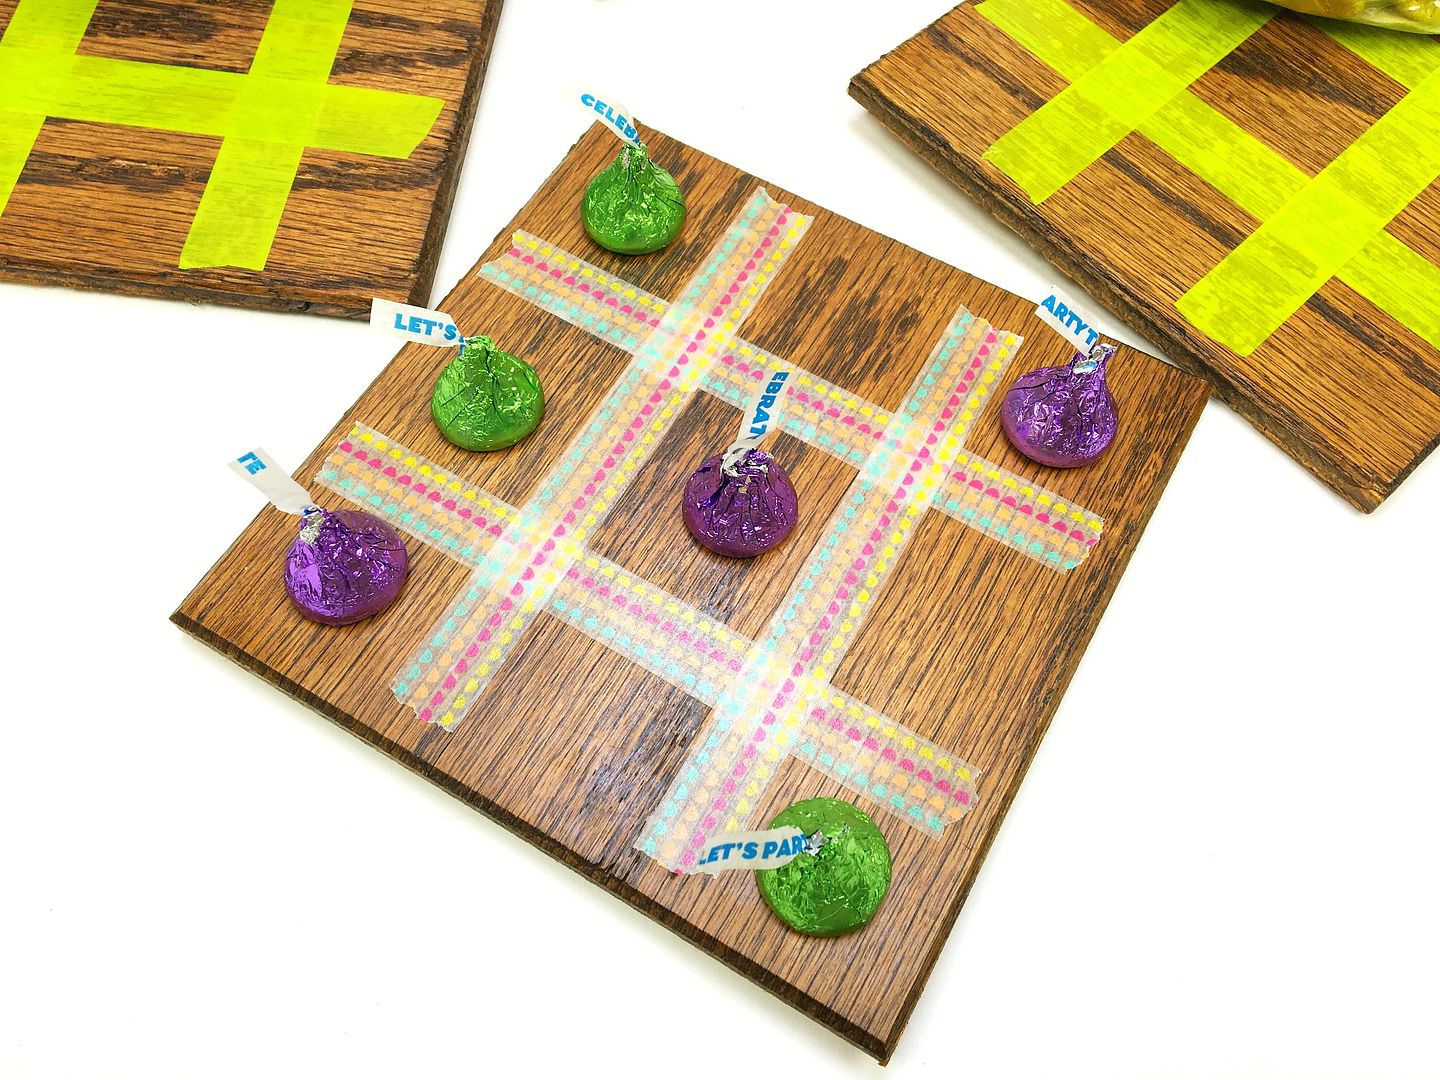 These DIY Tic Tac Toe Boards are perfect for your next birthday party! The kids can make them as an activity and they double as a favor!